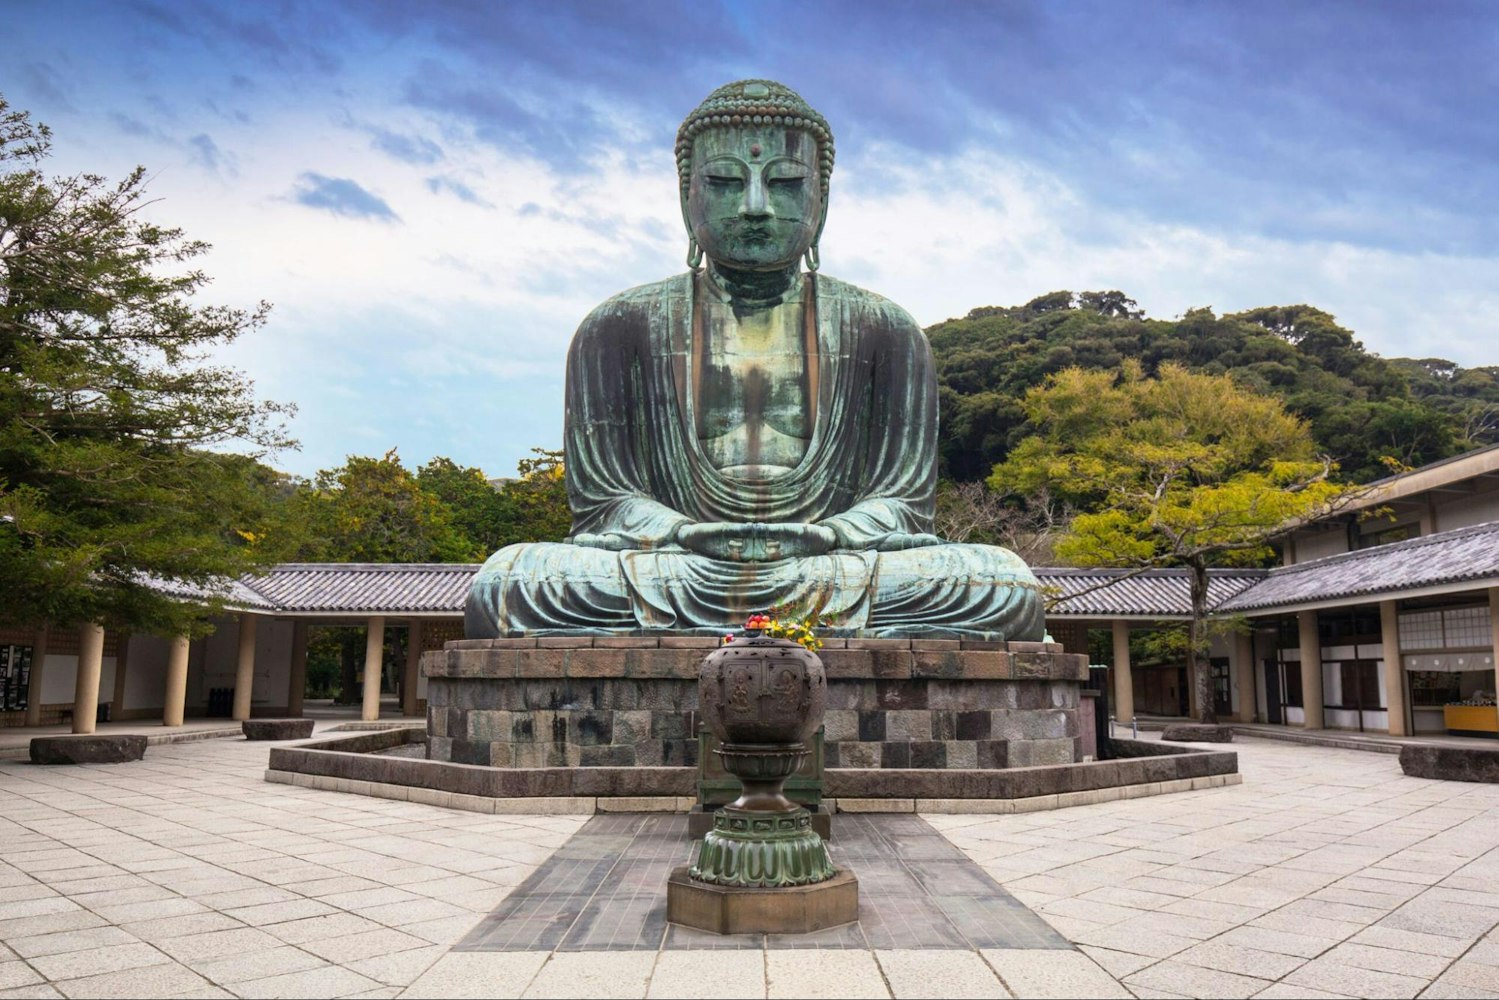 A majestic Buddha statue stands with a cloudy sky at back, symbolizing serenity and spirituality at the Kotokuin Temple in Kamakura City, Japan.